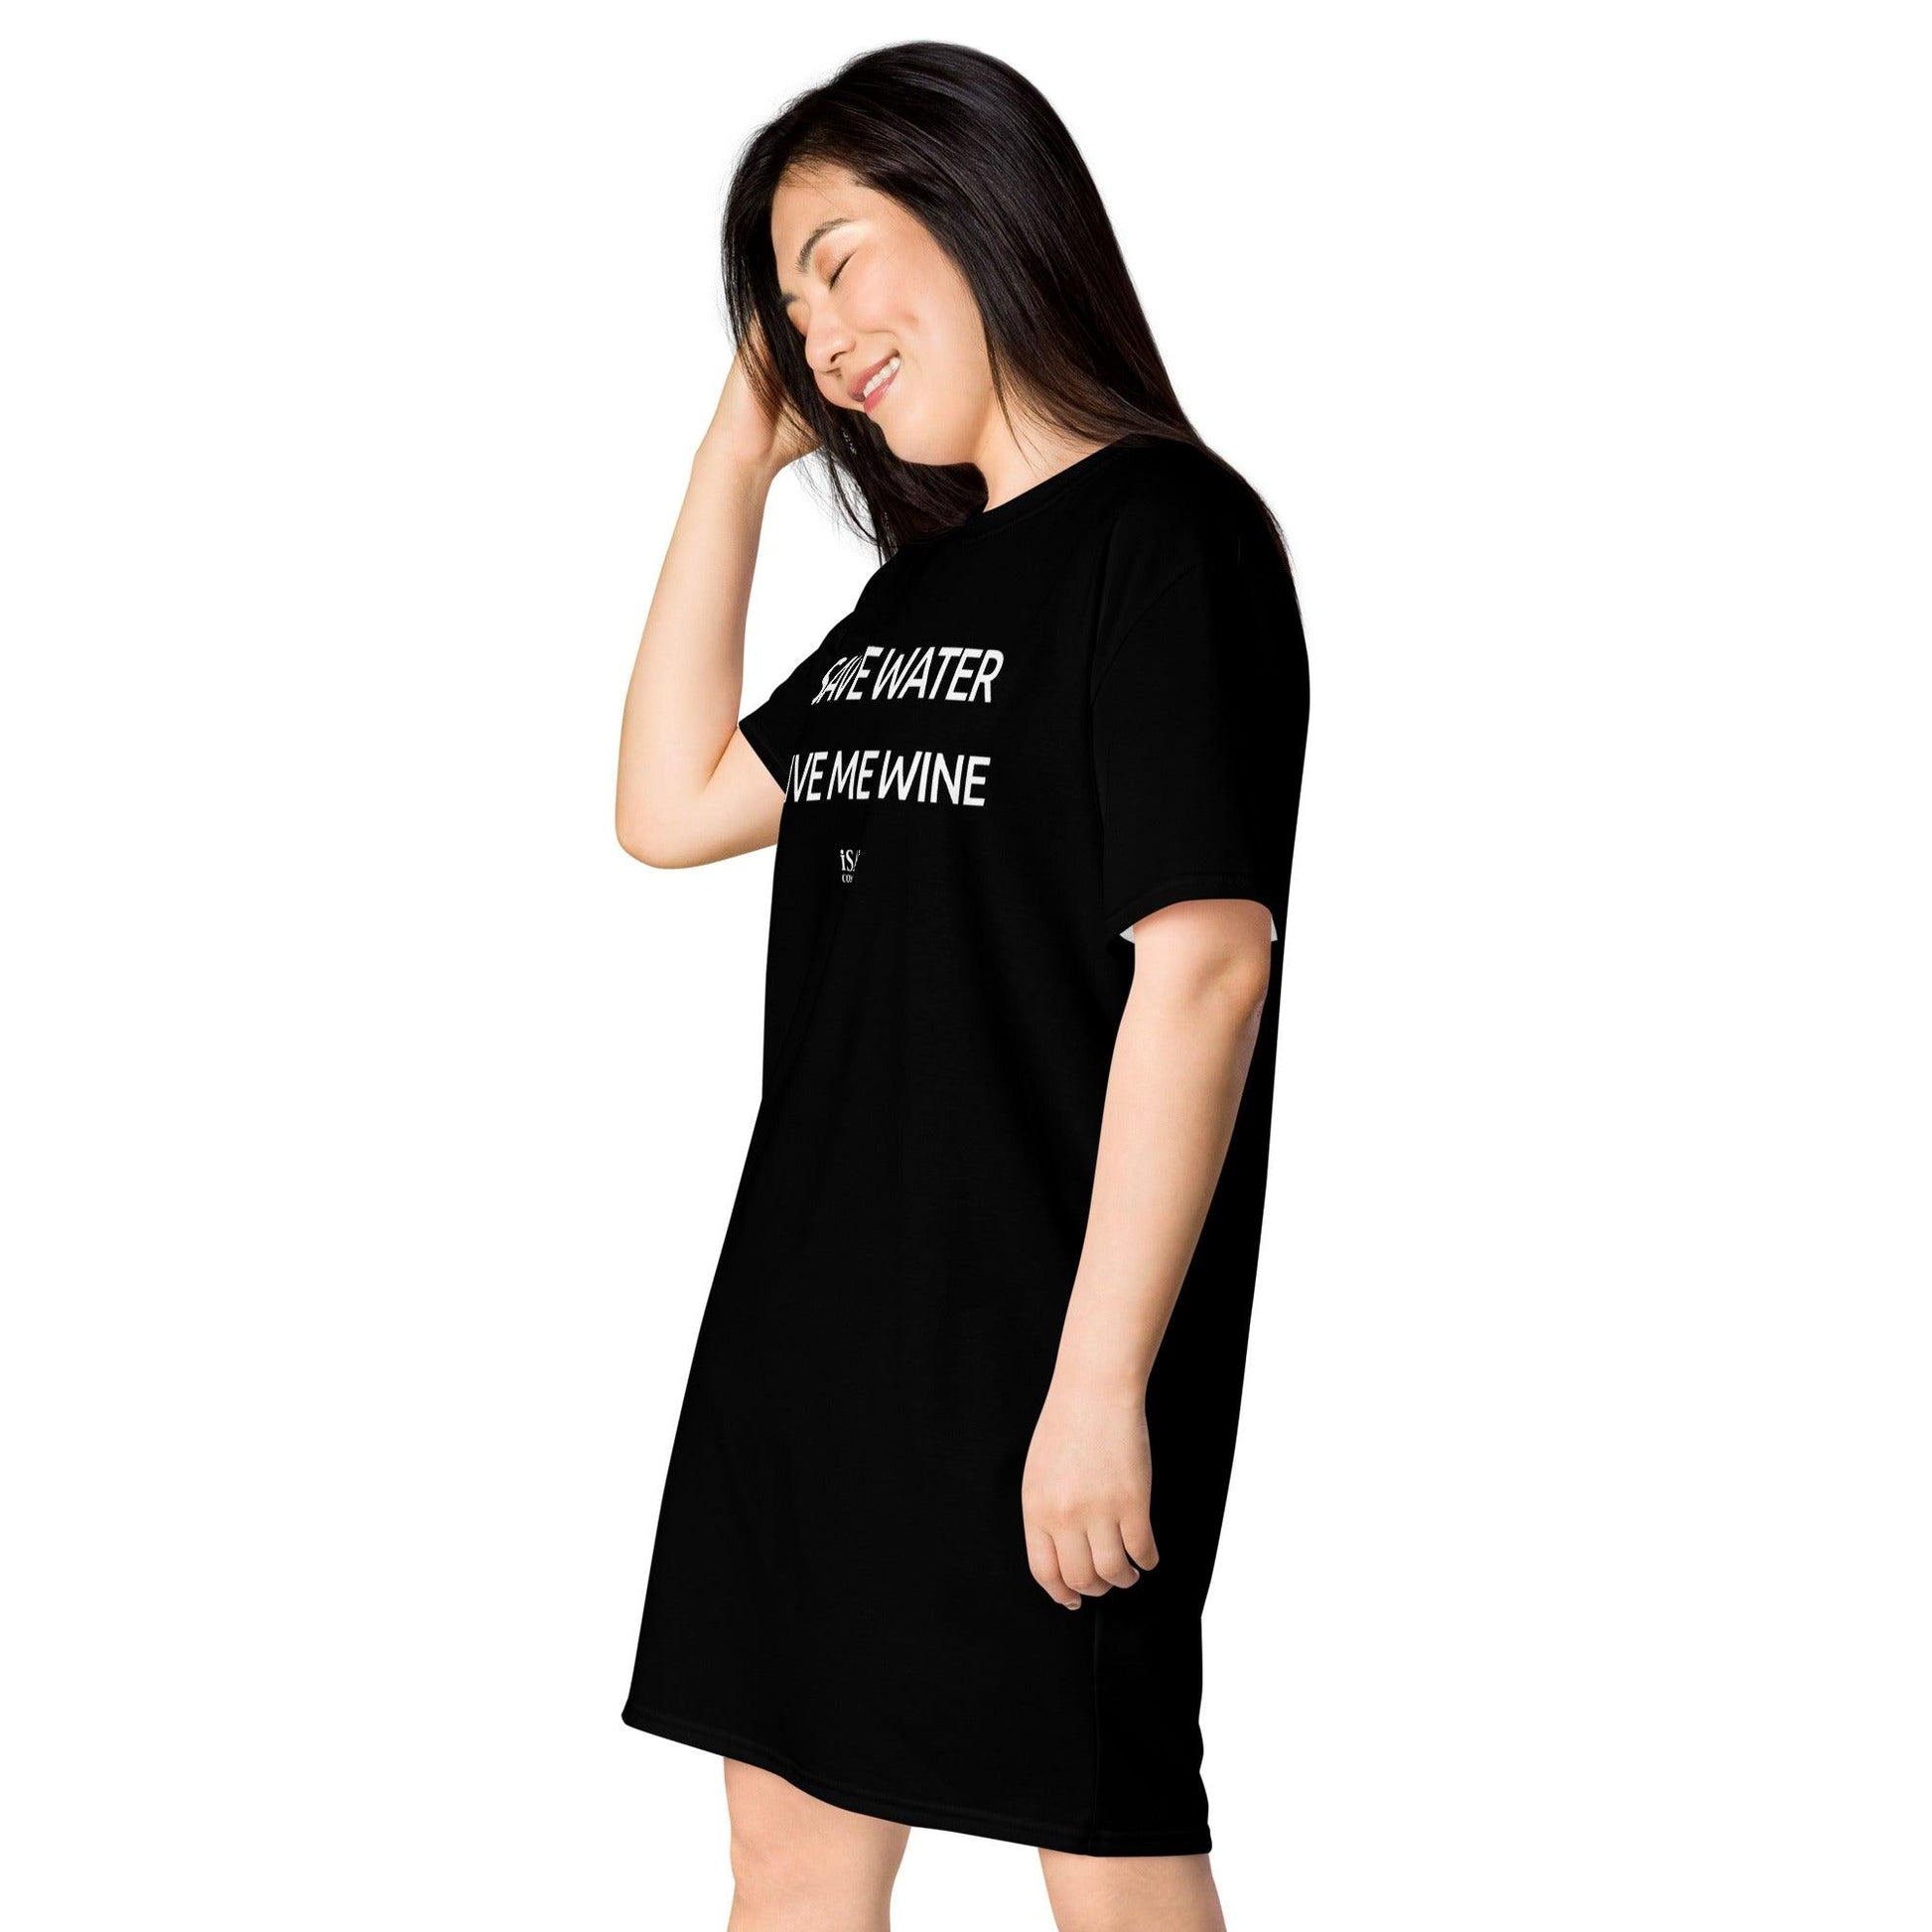 Save Water Give Me Wine - Womens Black T-Shirt Dress - iSAW Company